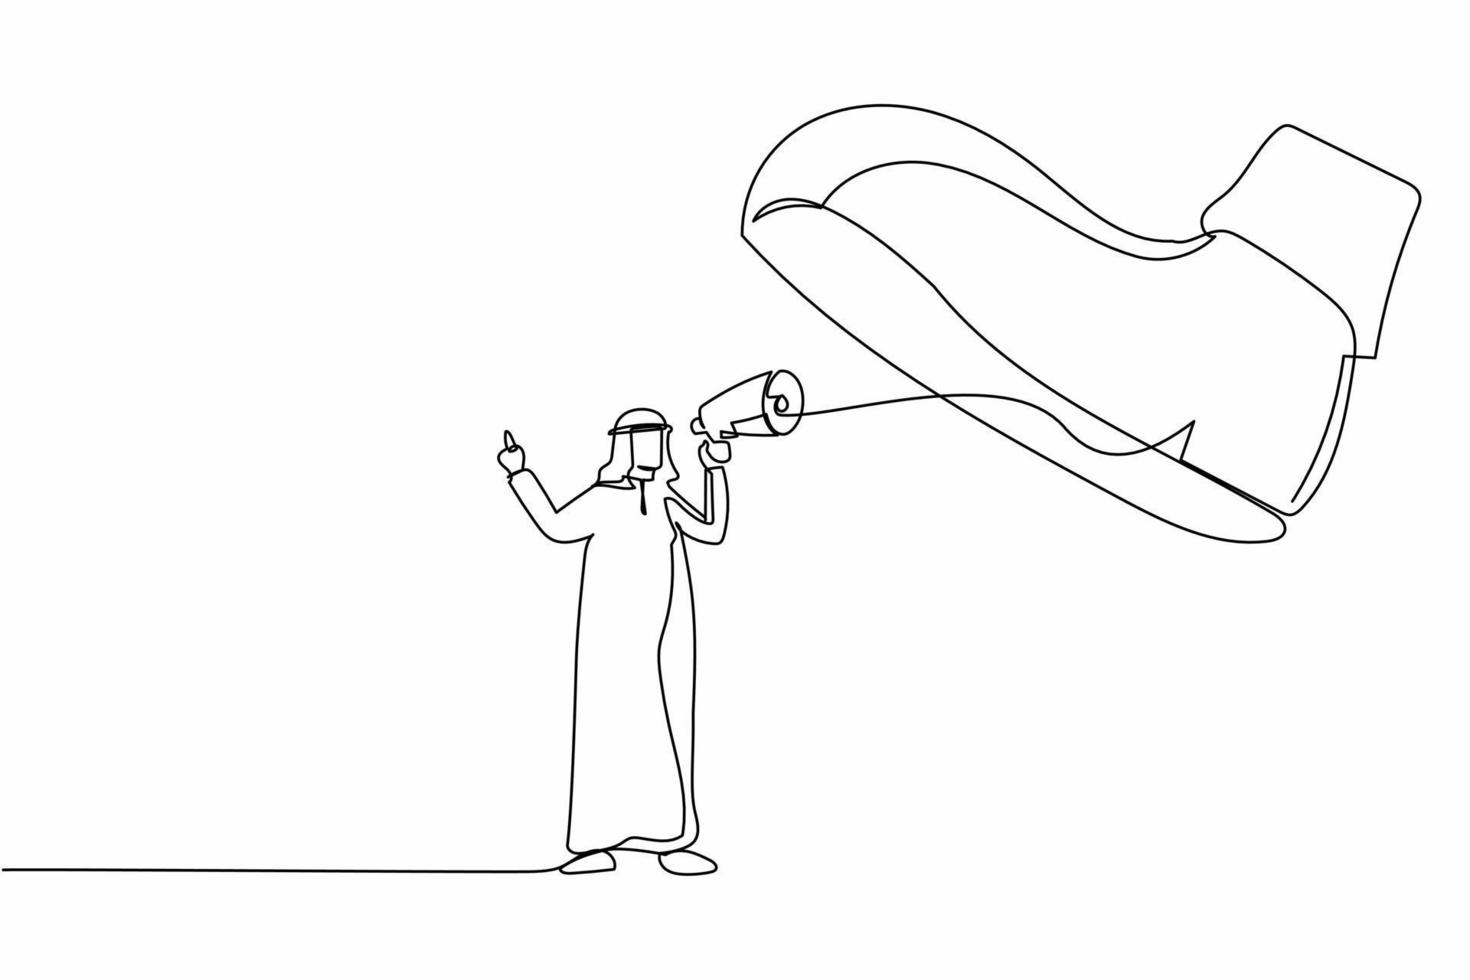 Single continuous line drawing active Arab businessman speaking with megaphone under giant shoe. Boot stepping on businessperson. Minimalism metaphor. One line draw graphic design vector illustration